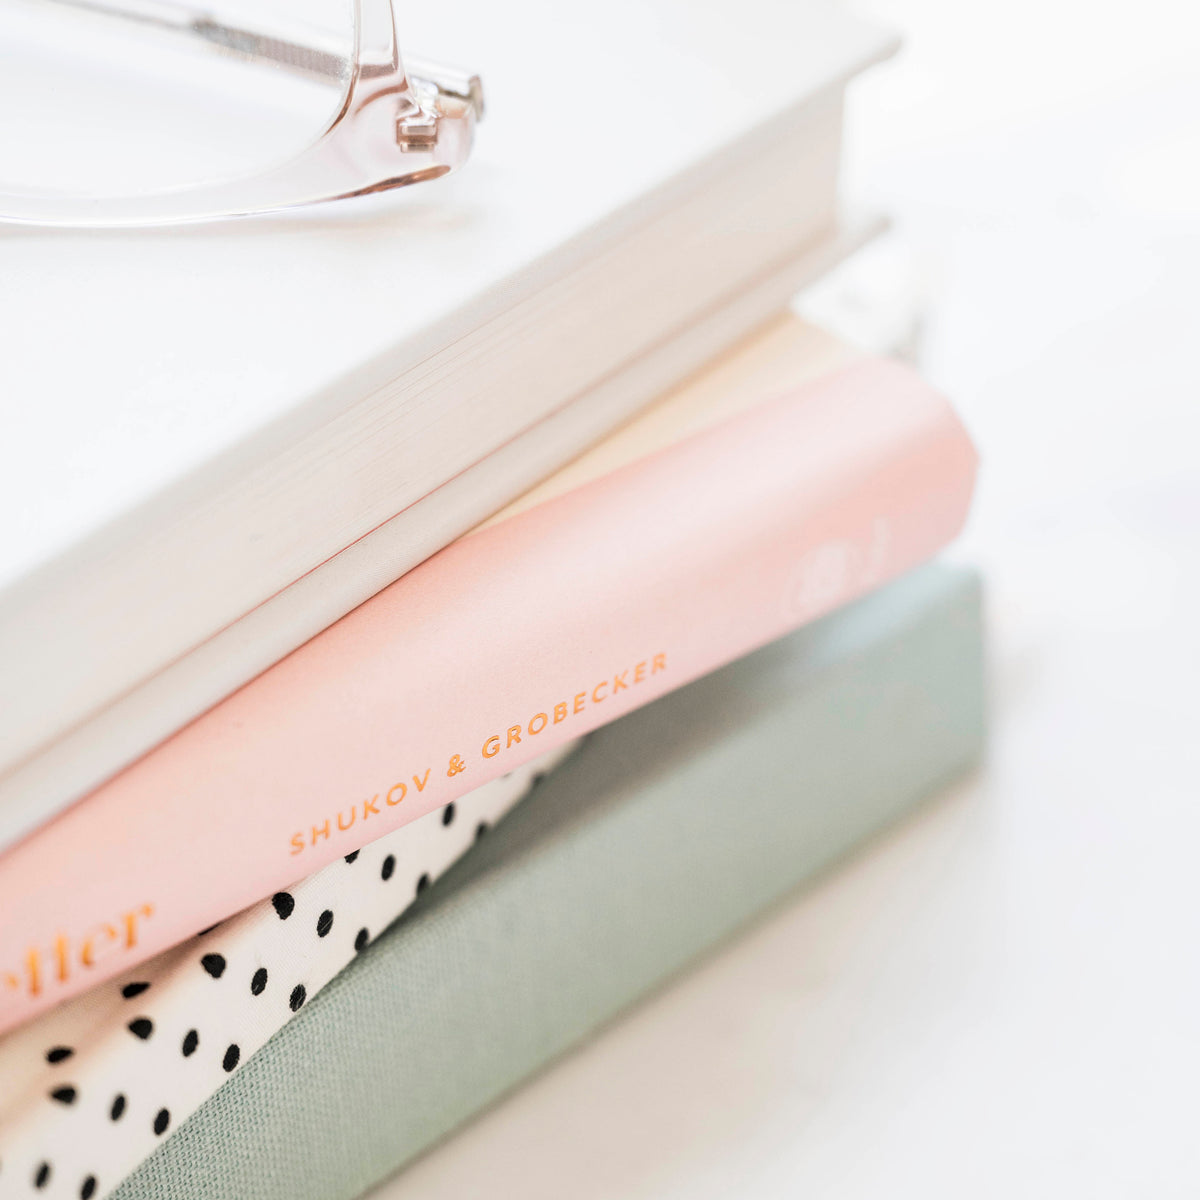 how to write a letter book spine